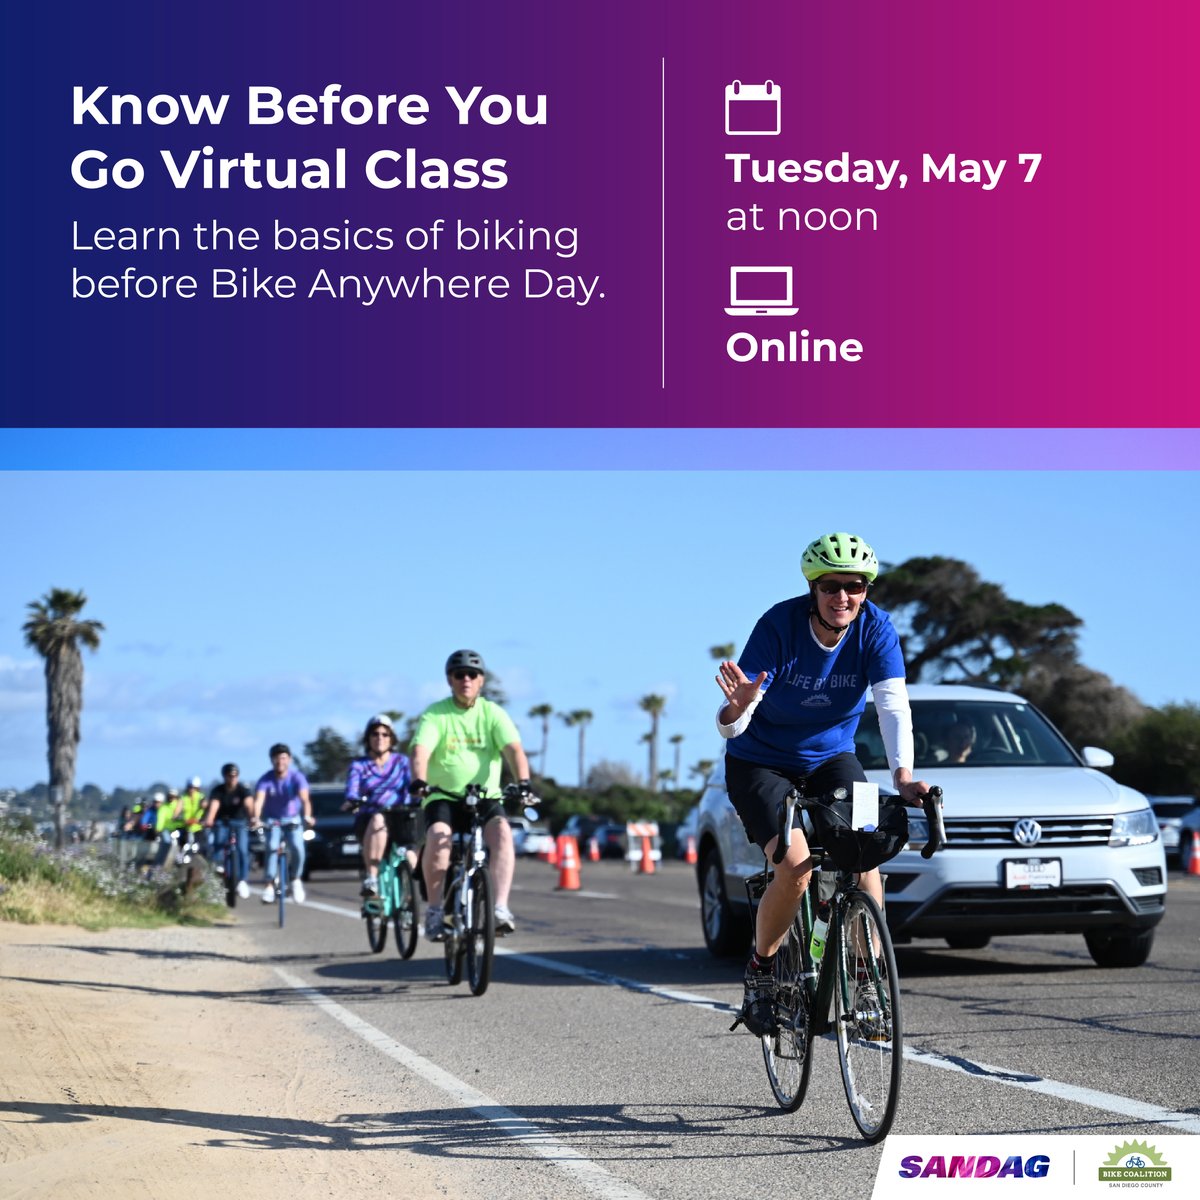 Need a refresher on biking basics before Bike Anywhere Day? Tune in to our free, virtual class on Tuesday, May 7 at noon to learn about traffic laws, route planning, and more! Register at bit.ly/3WsgPaK 🚴💨 #BikeAnywhereSD